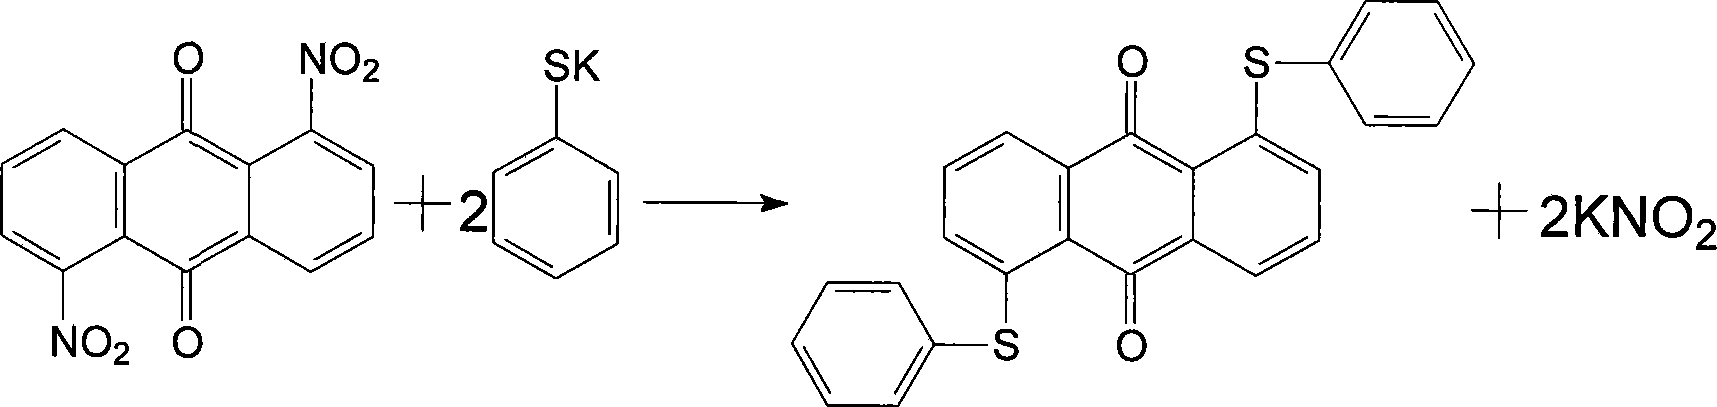 Novel technique for synthesizing solvent yellow 189